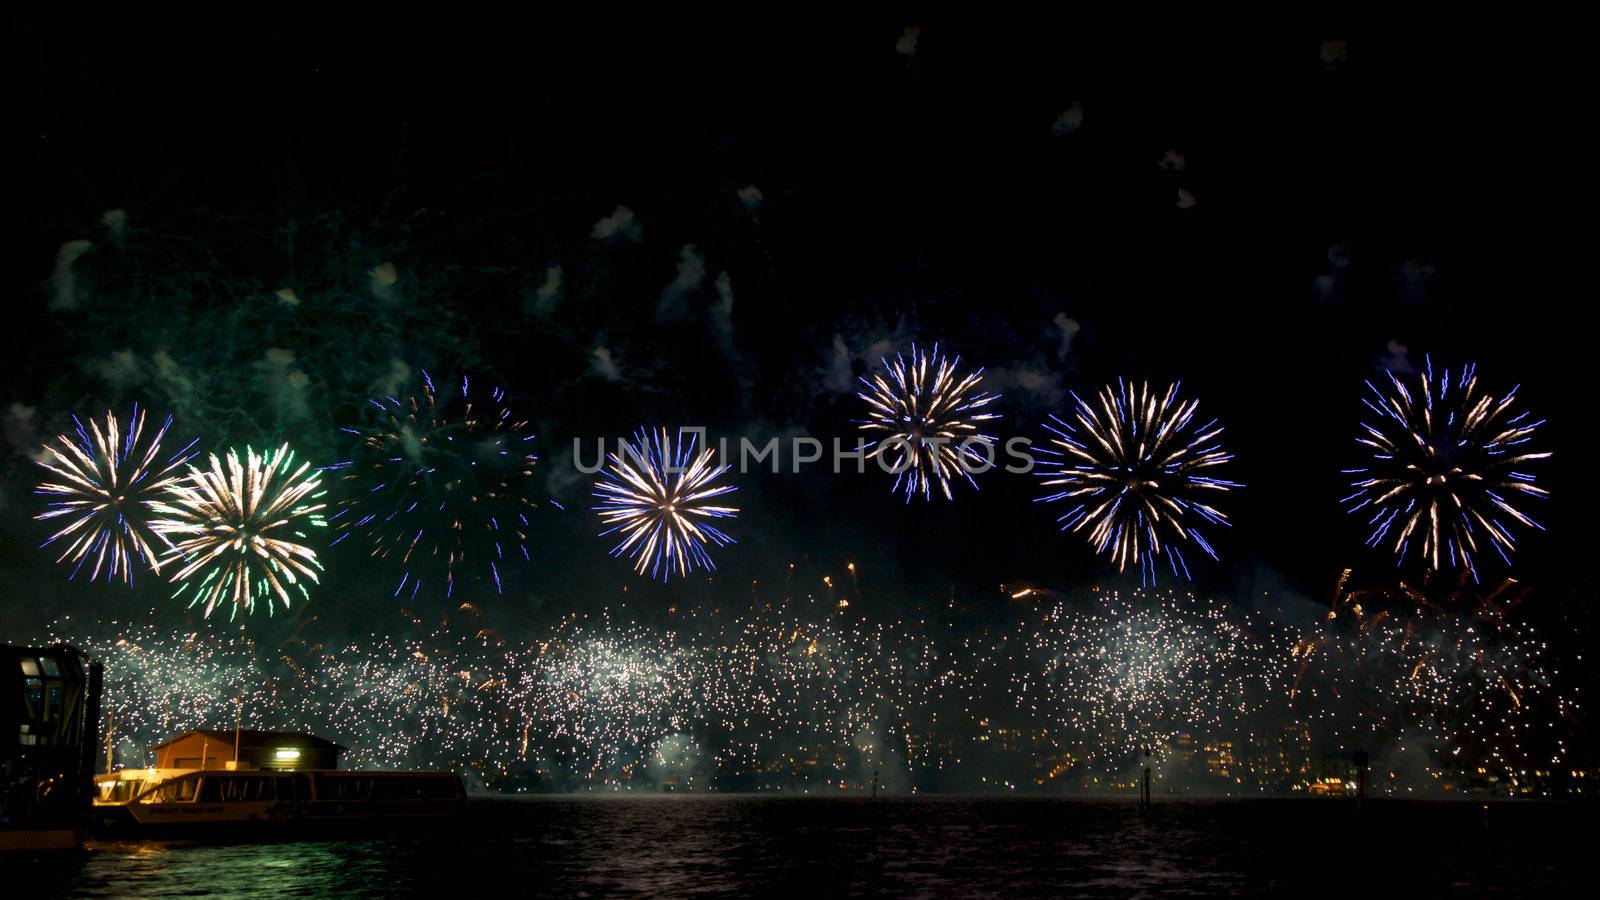 Fireworks celebrating Australia Day on 26 January explode over the Swan River in Perth, Western Australia. This year's theme was 'Family', with a special emphasis on the victims of the recent floods in Australia.